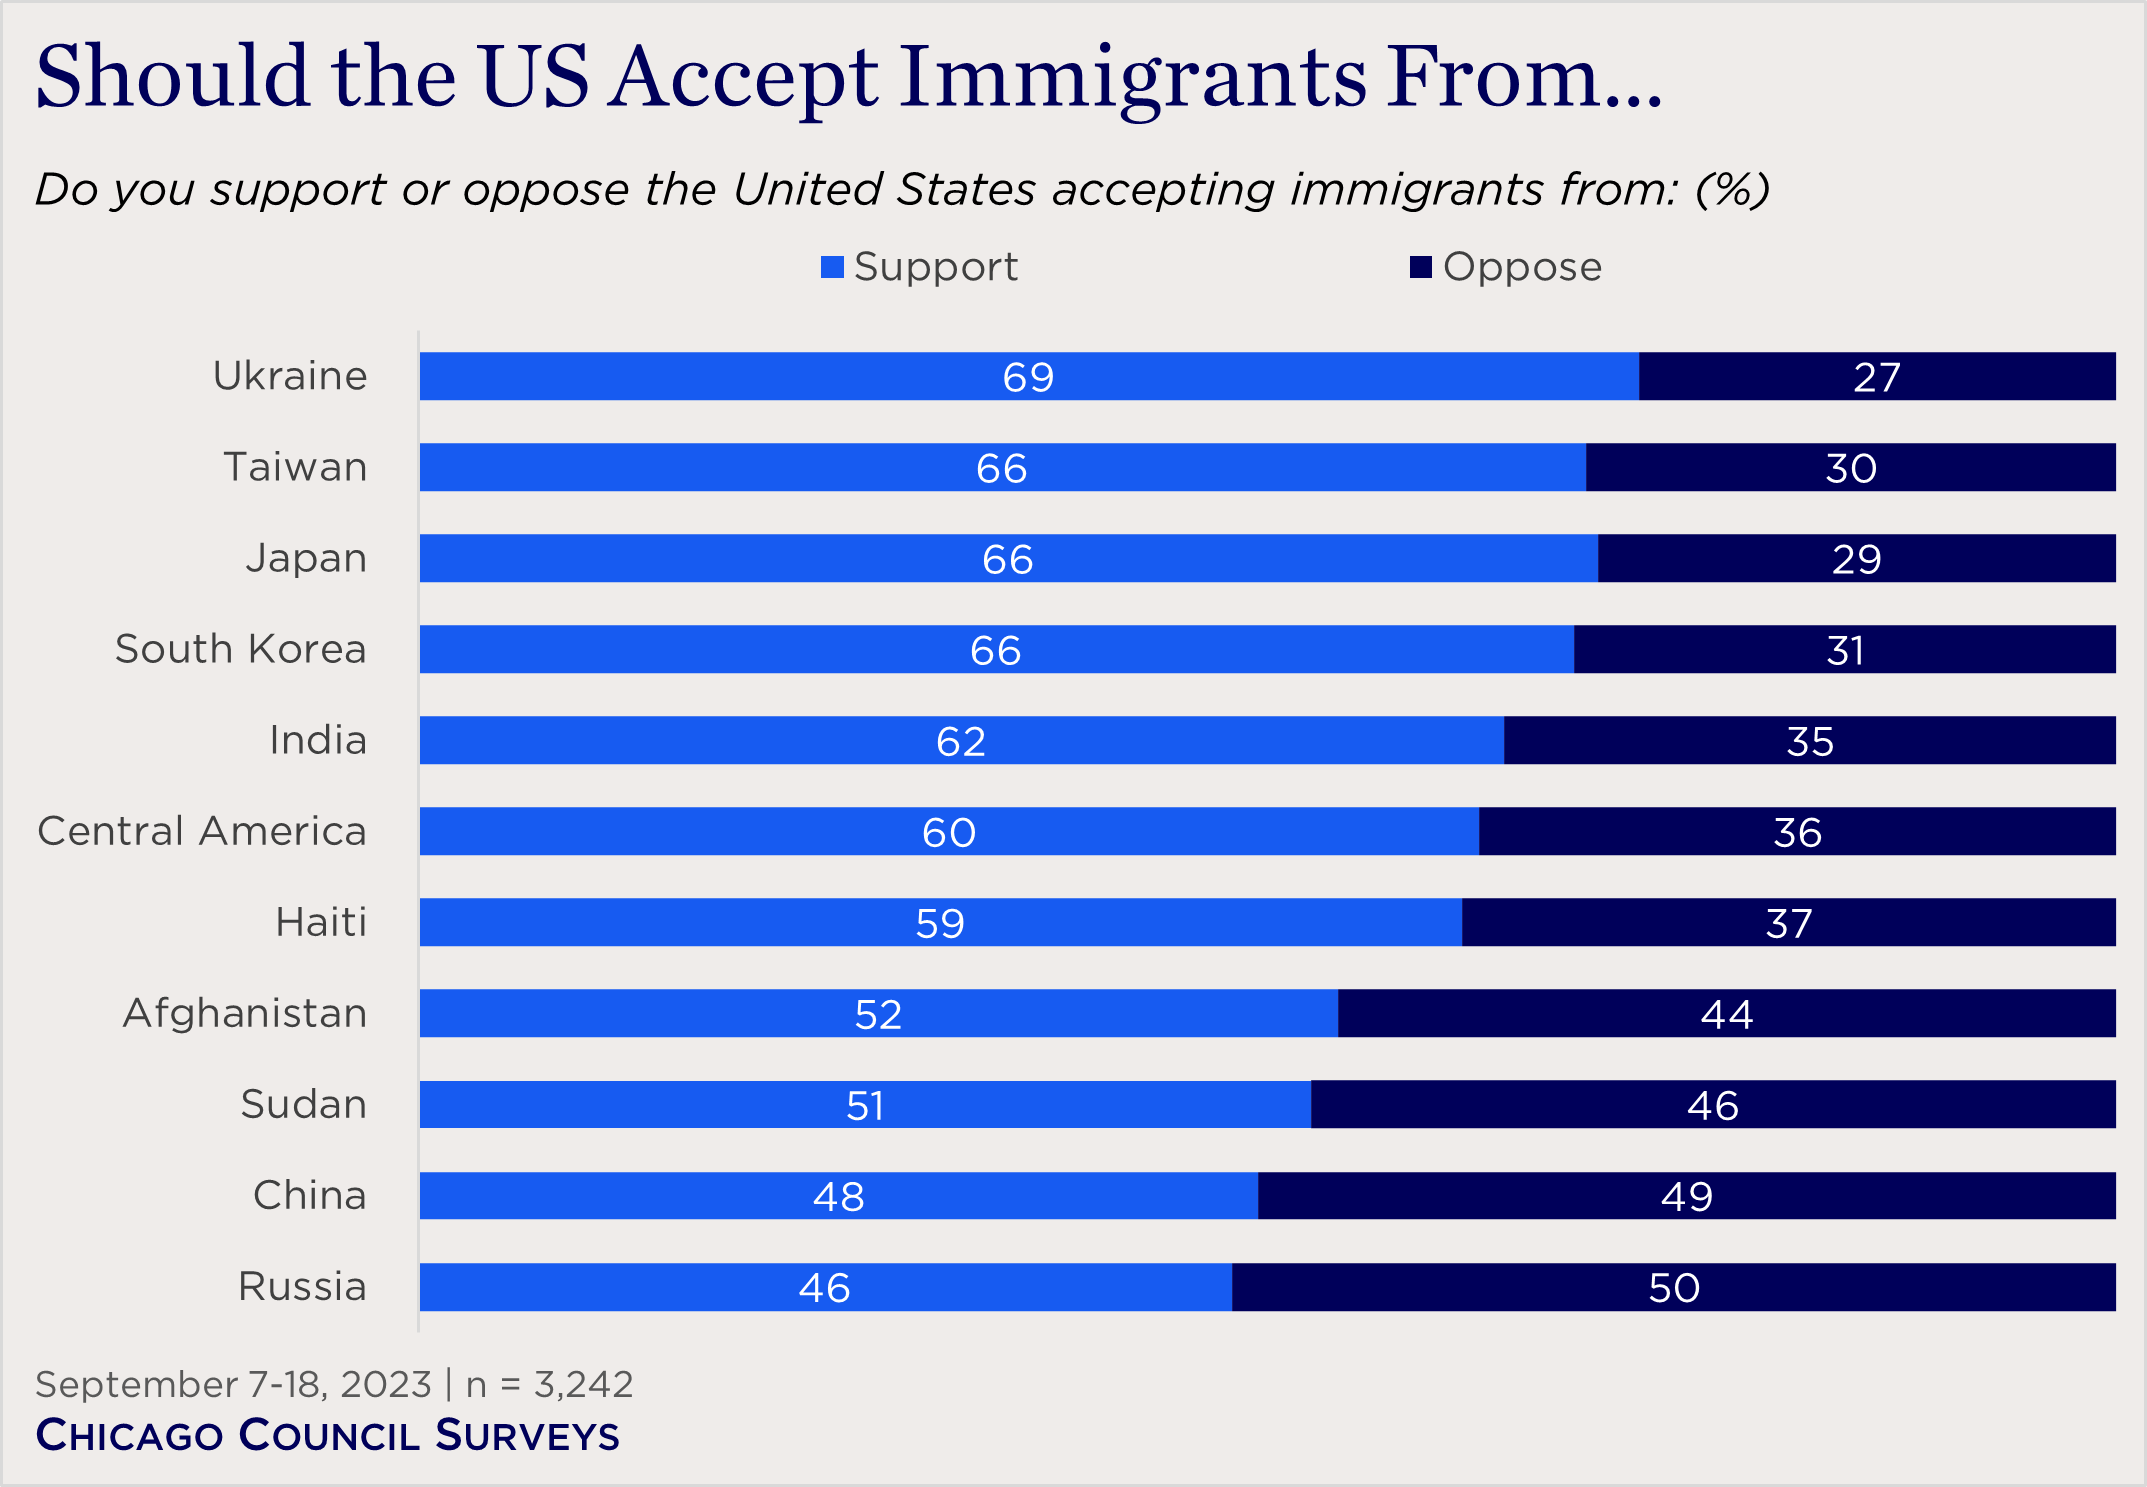 "bar chart showing views on accepting immigrants"